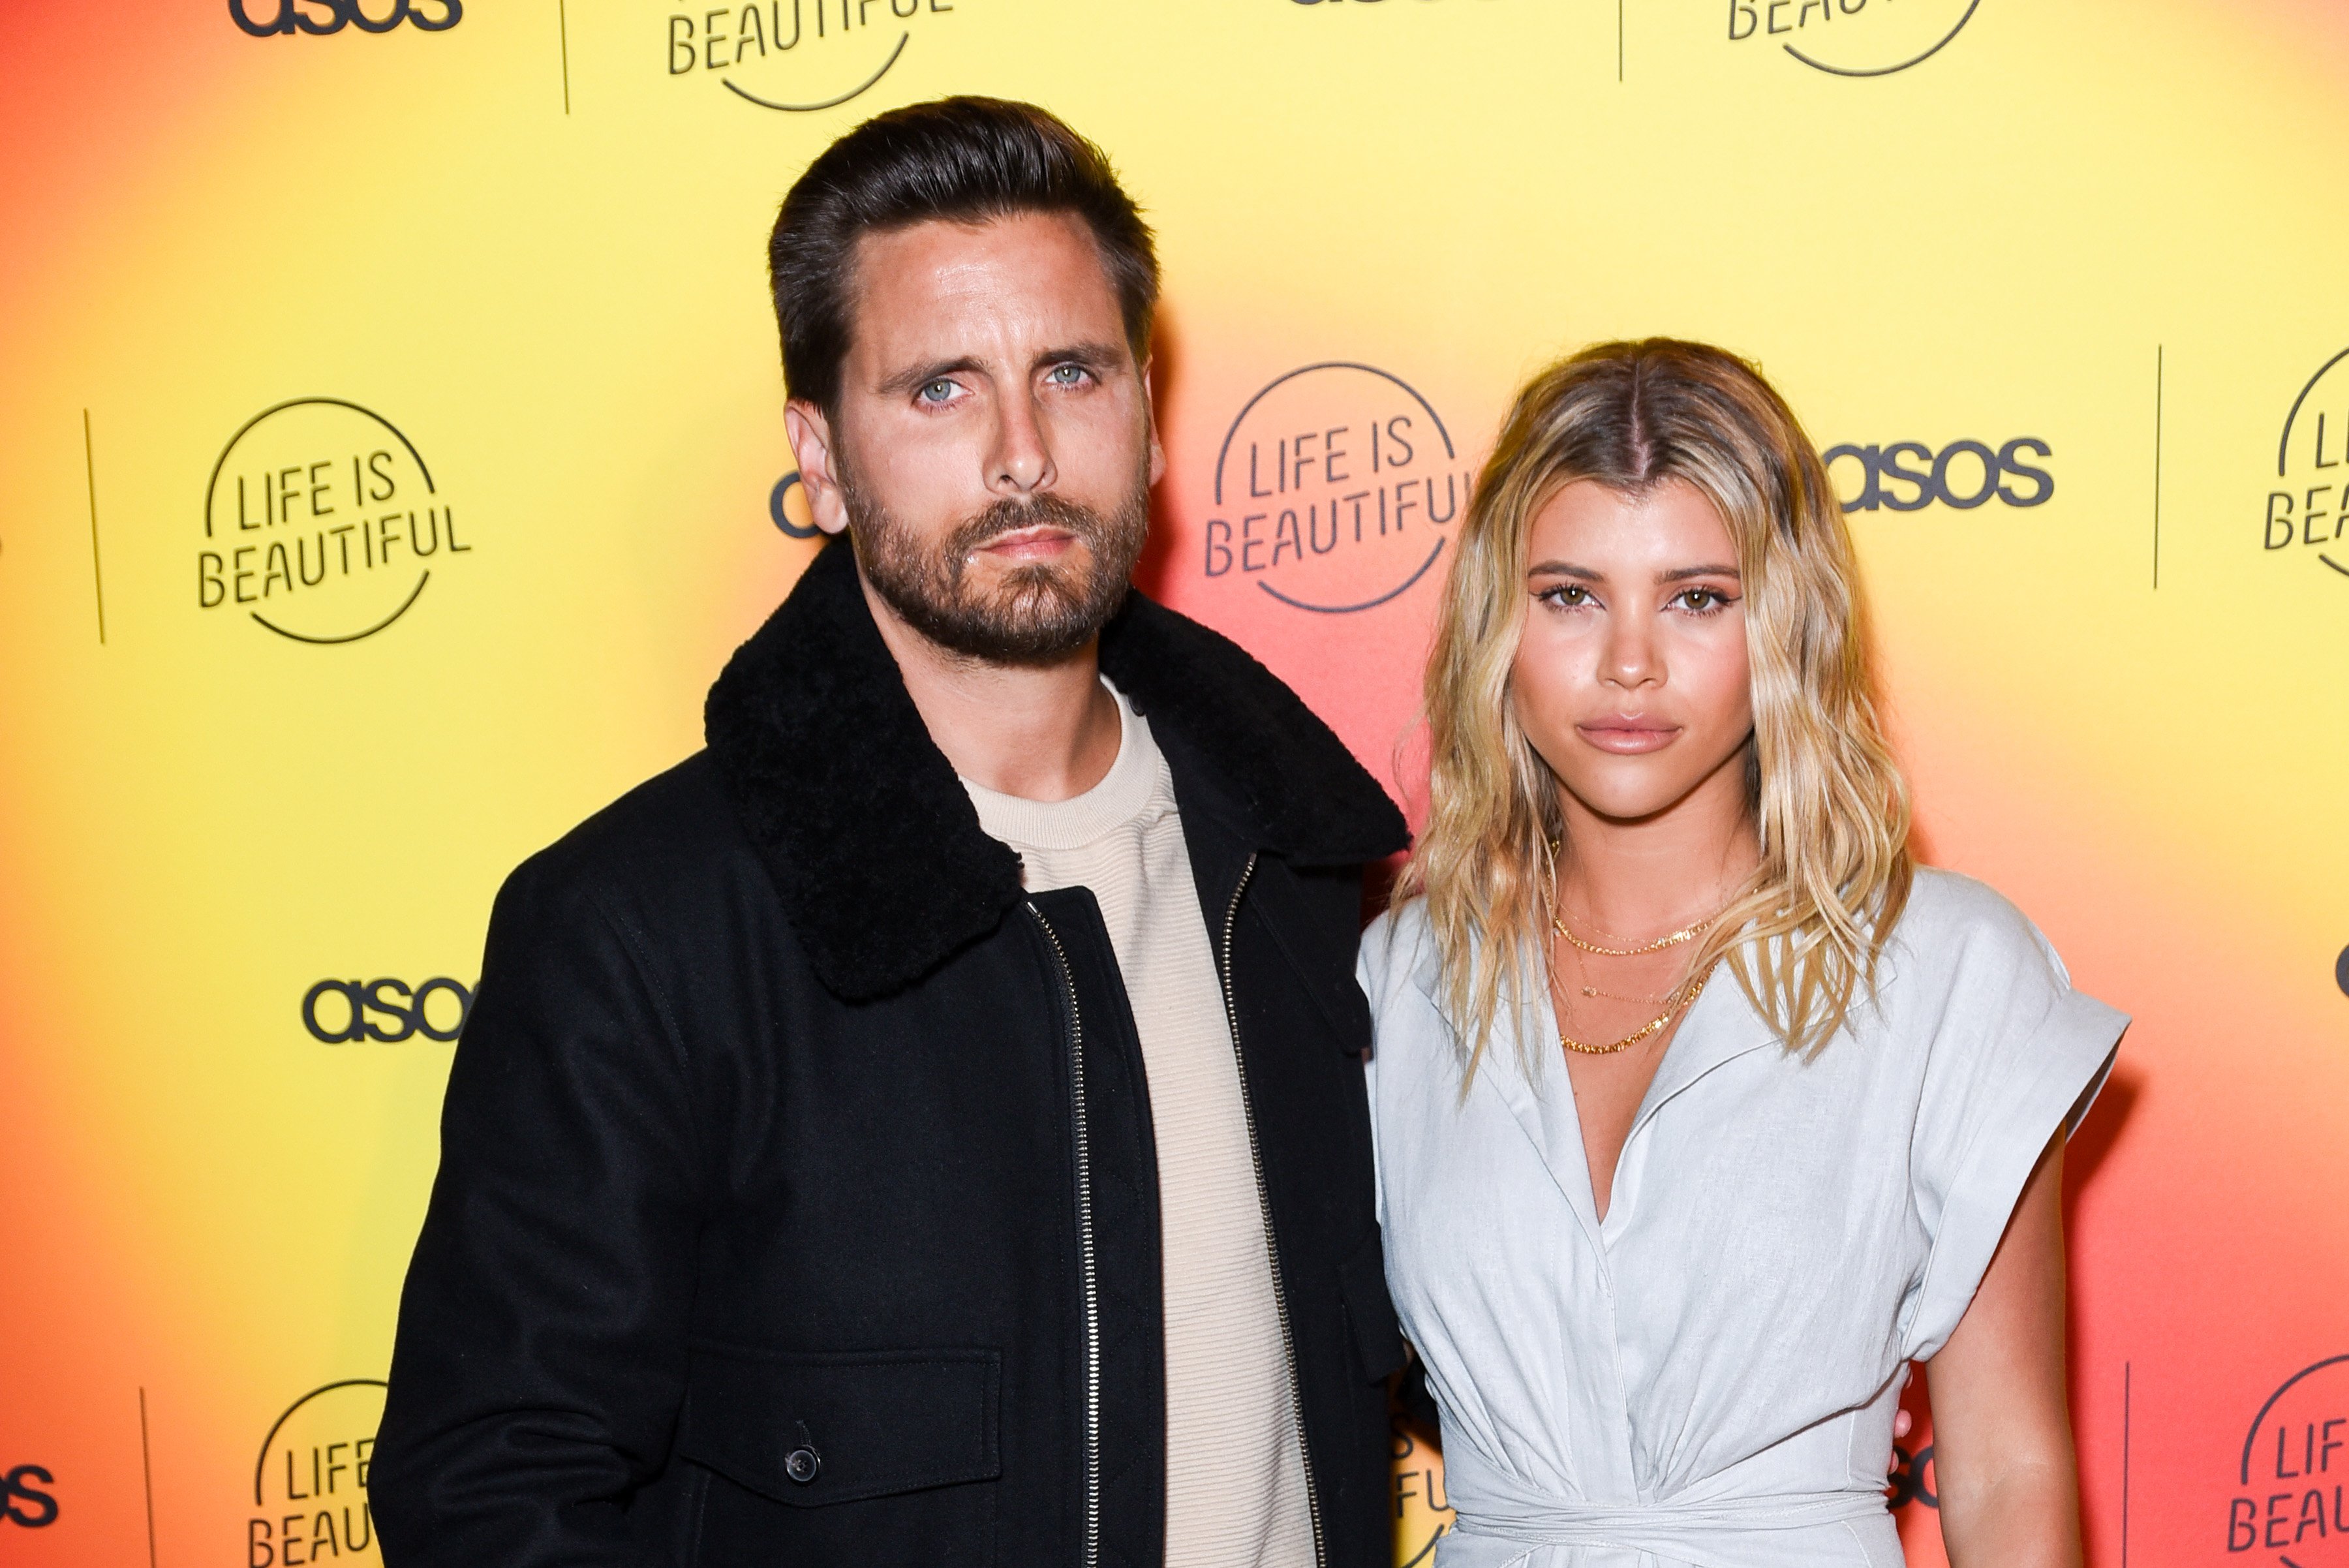 Scott Disick and Sofia Richie attend ASOS celebrates partnership with Life is Beautiful in Los Angeles, California on April 25, 2019 | Photo: Getty Images